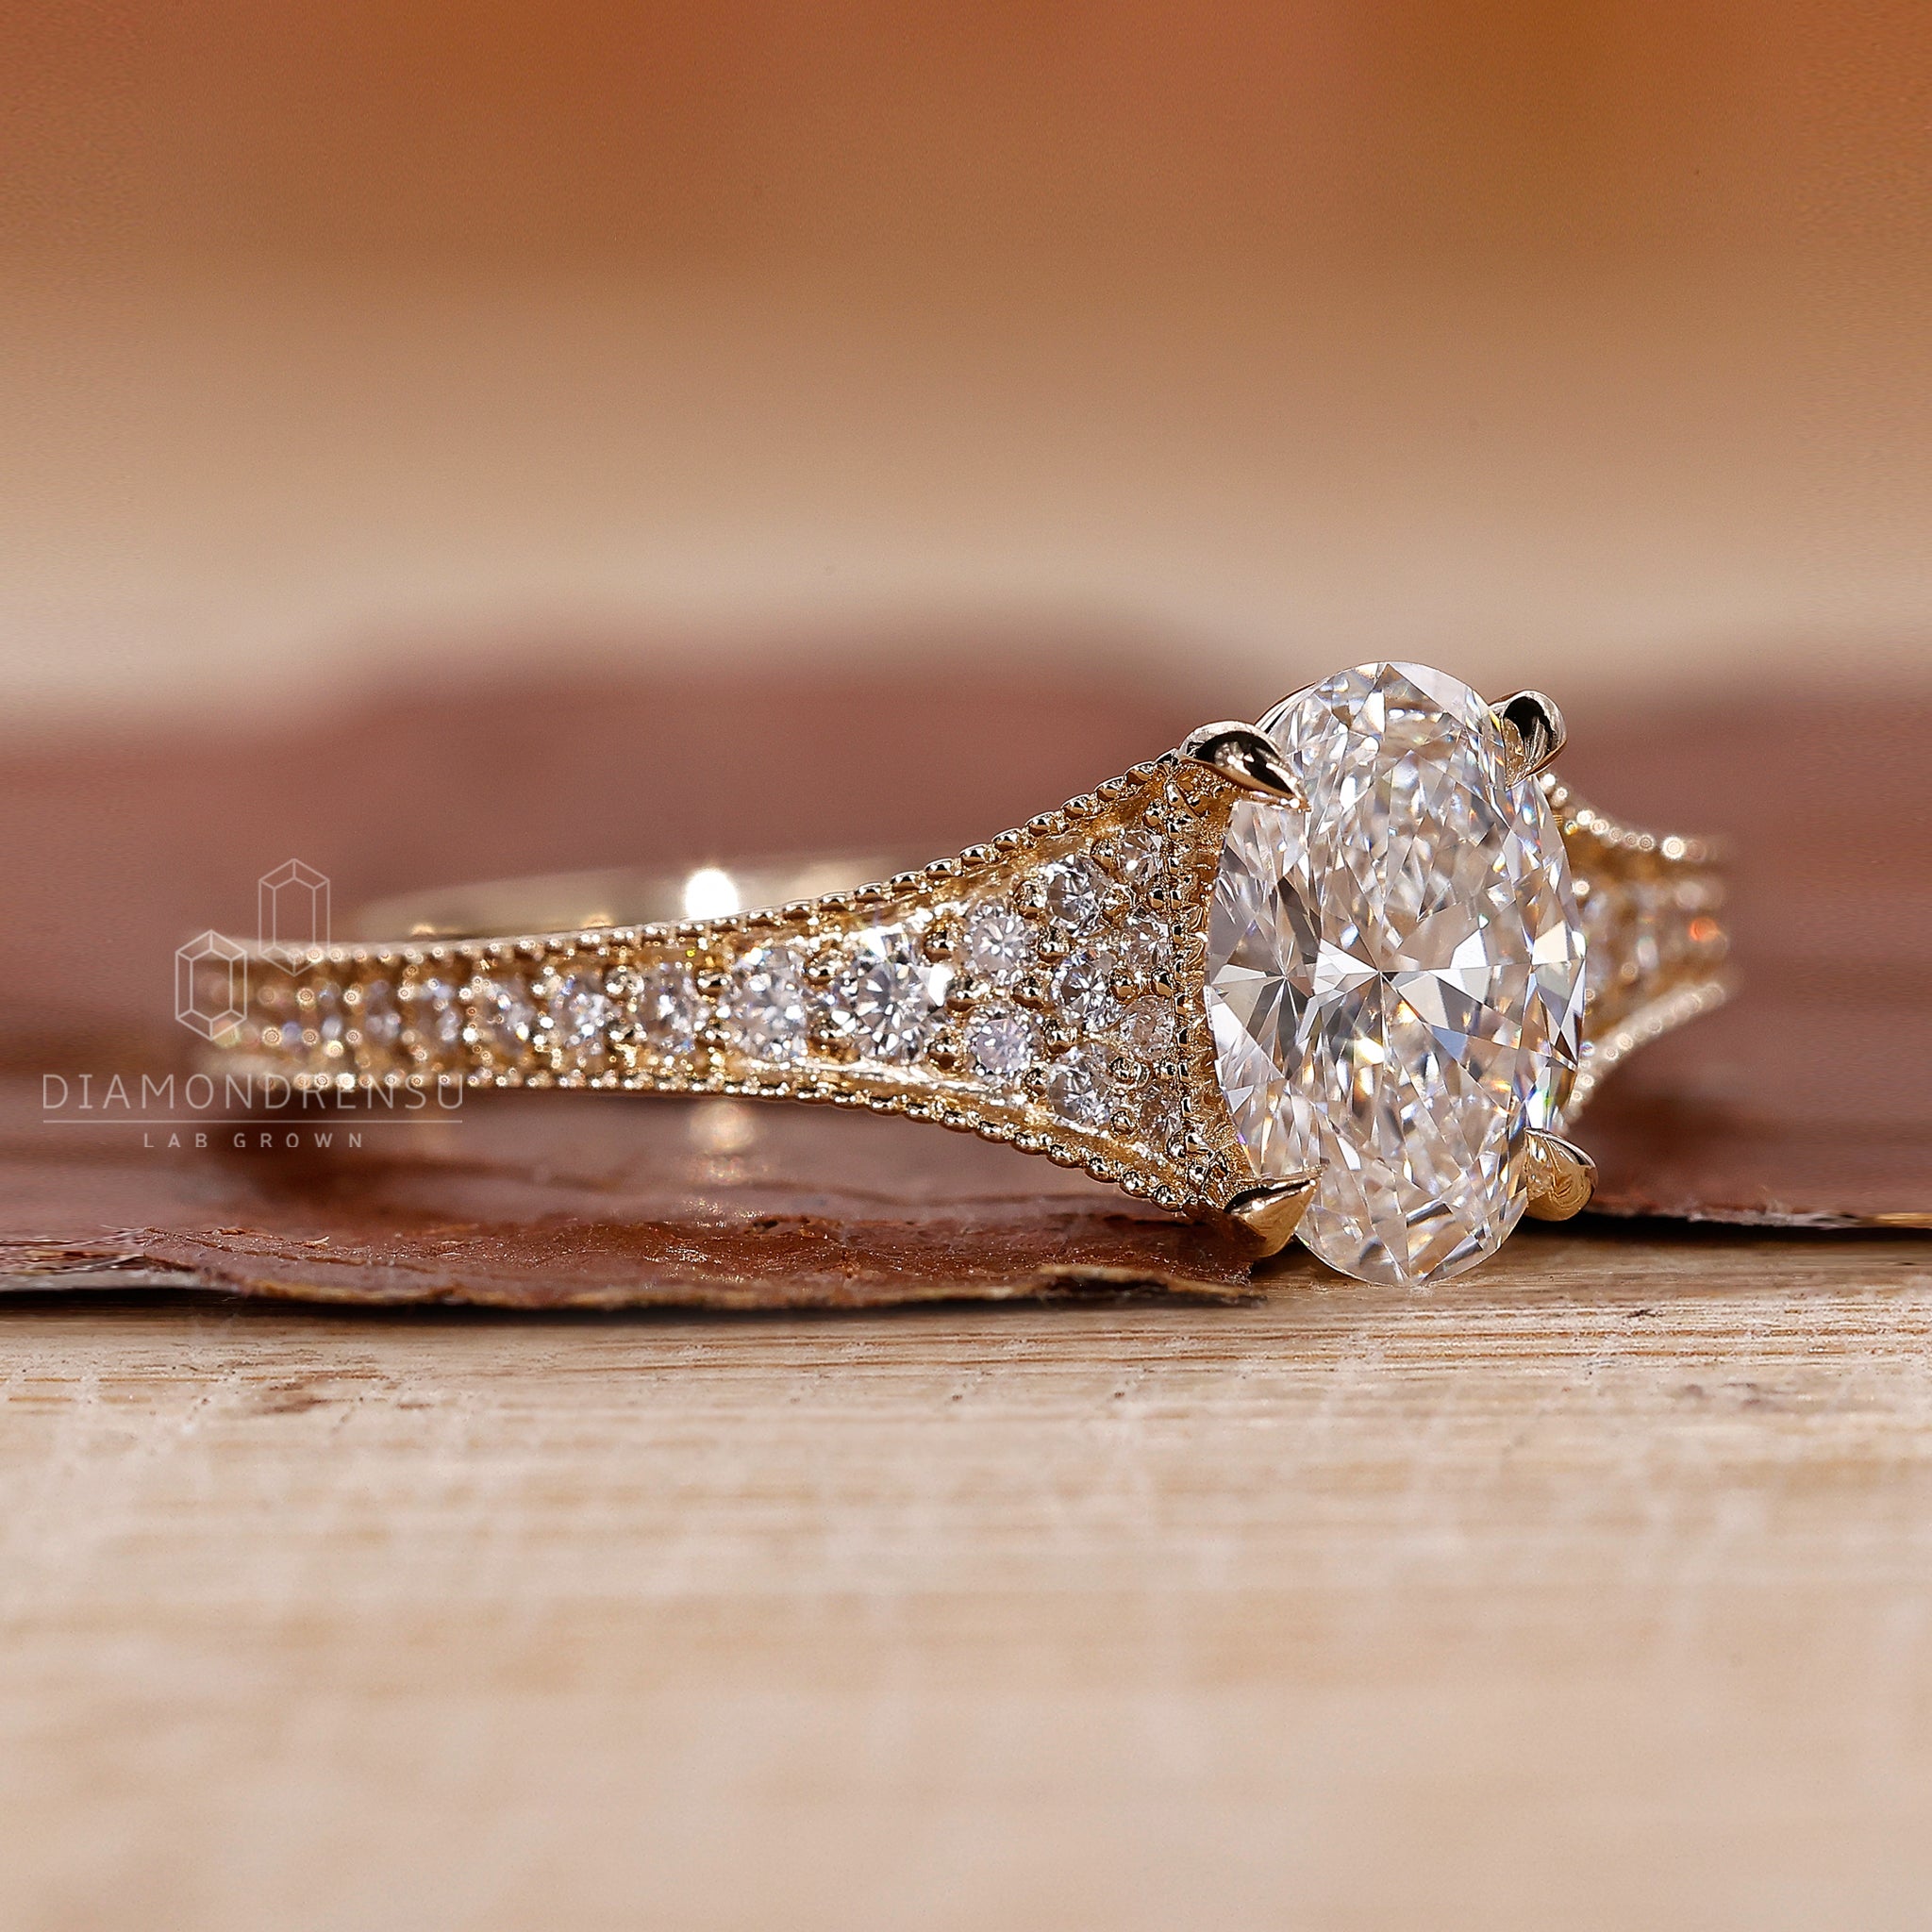 Miligrain Oval Diamond Ring, highlighting intricate detail and craftsmanship